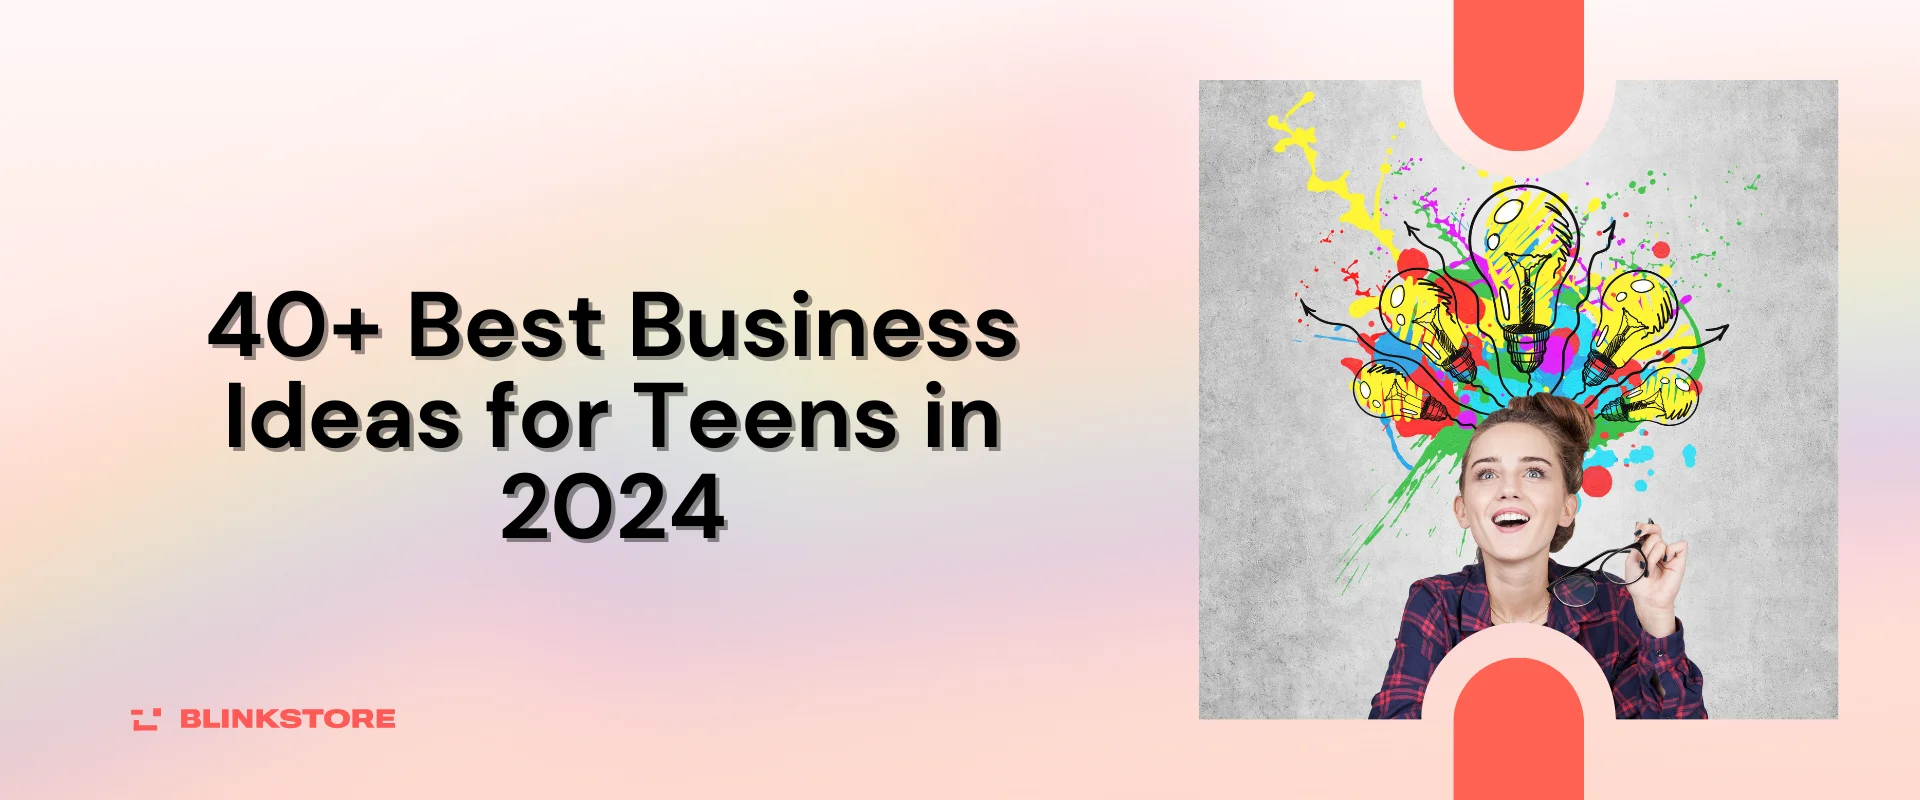 Business Ideas for Teens